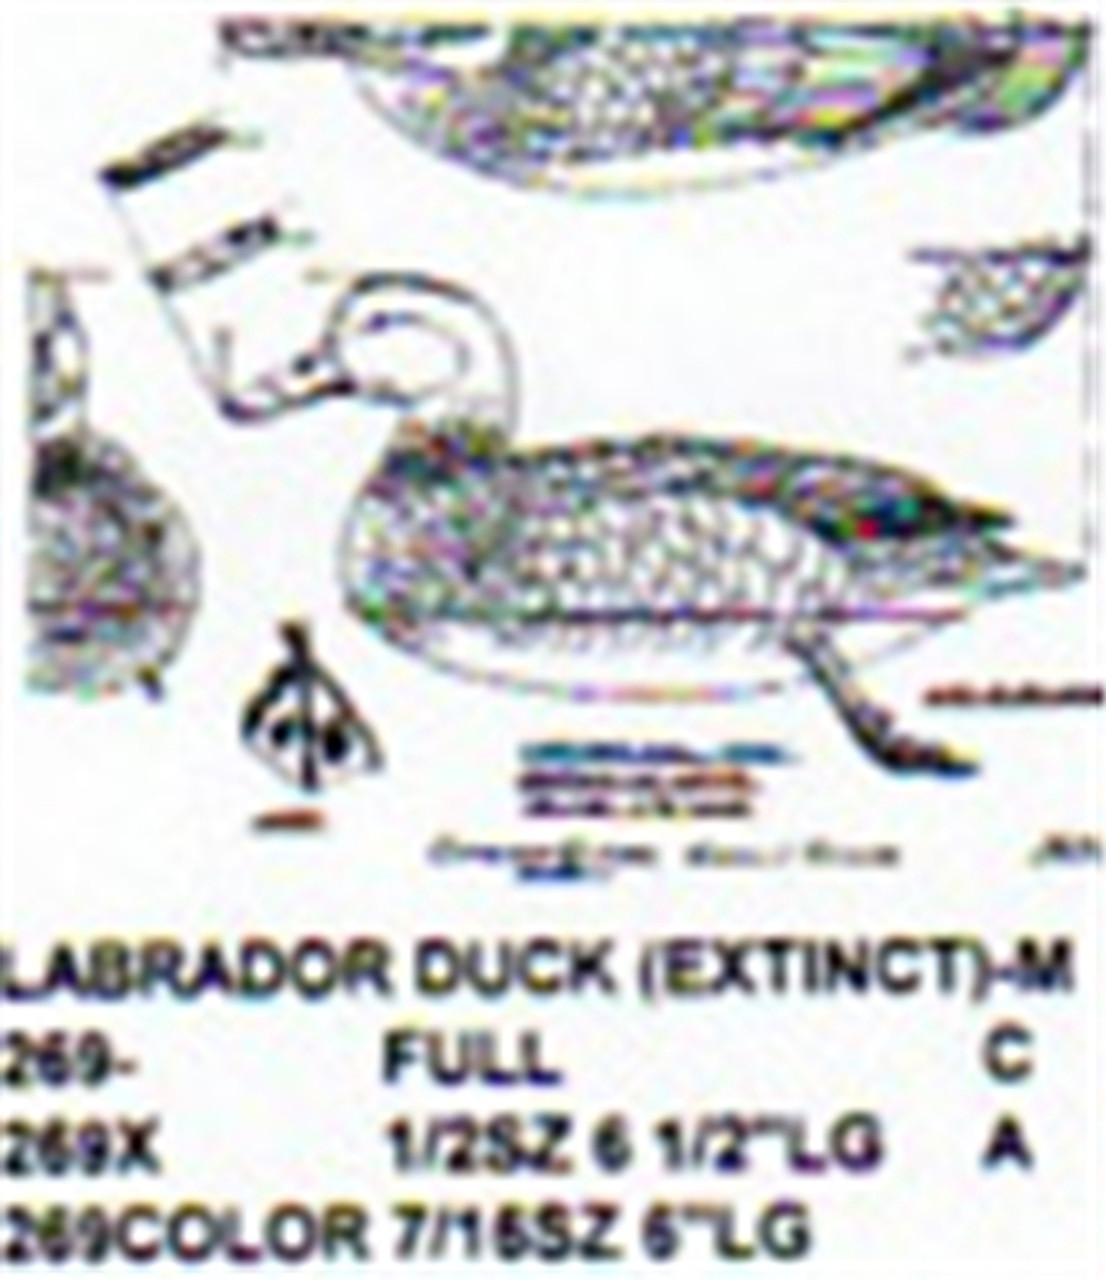 Labrador Duck Resting On Water Carving Pattern showing the two Stiller pattern sizes for the male Labrador Duck.